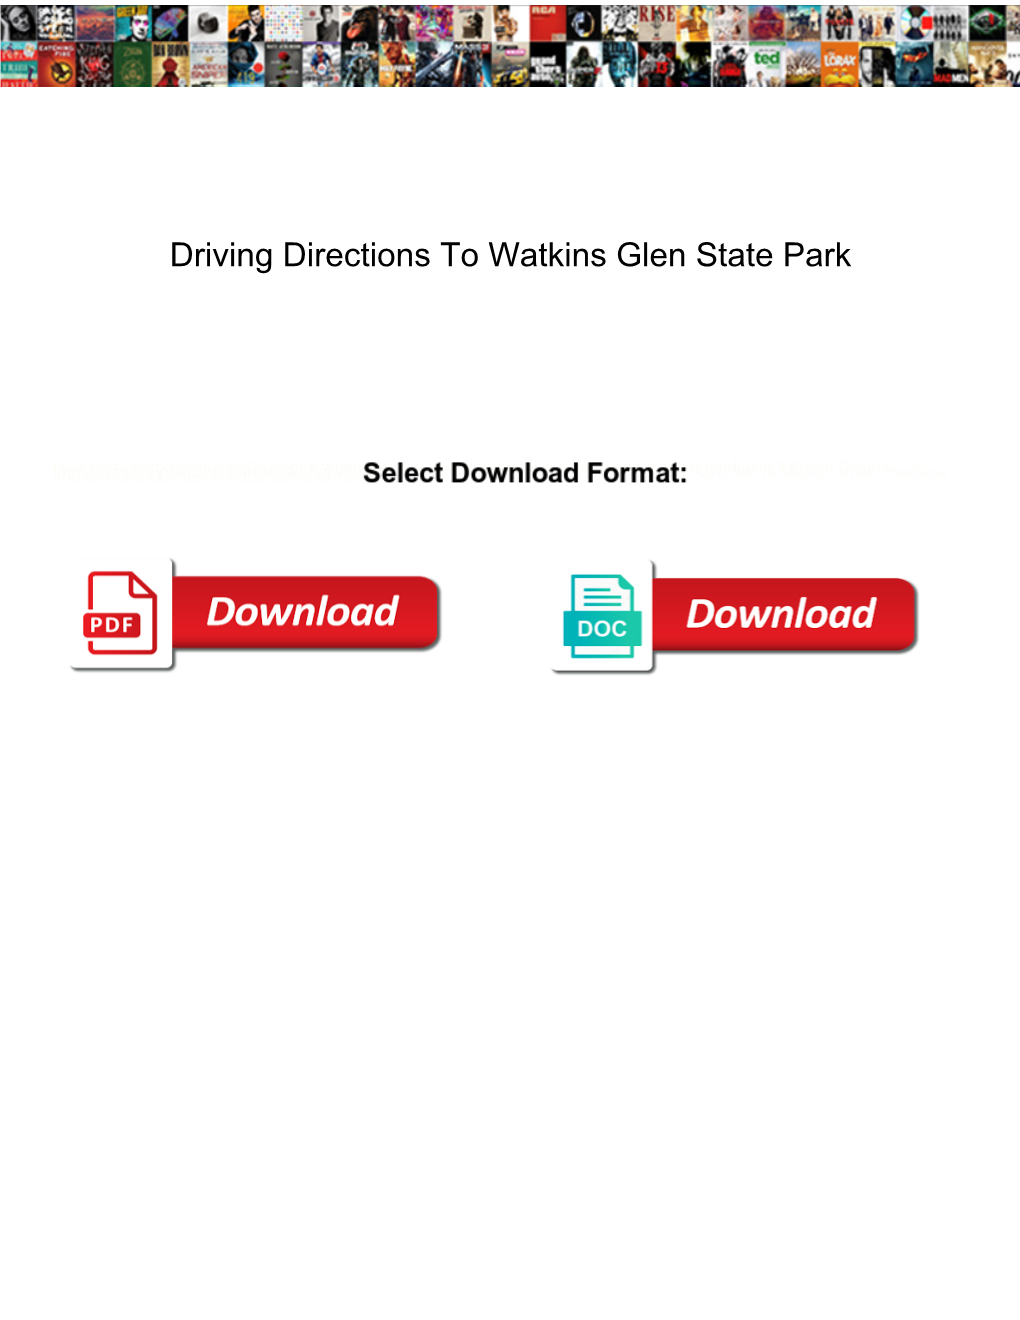 Driving Directions to Watkins Glen State Park